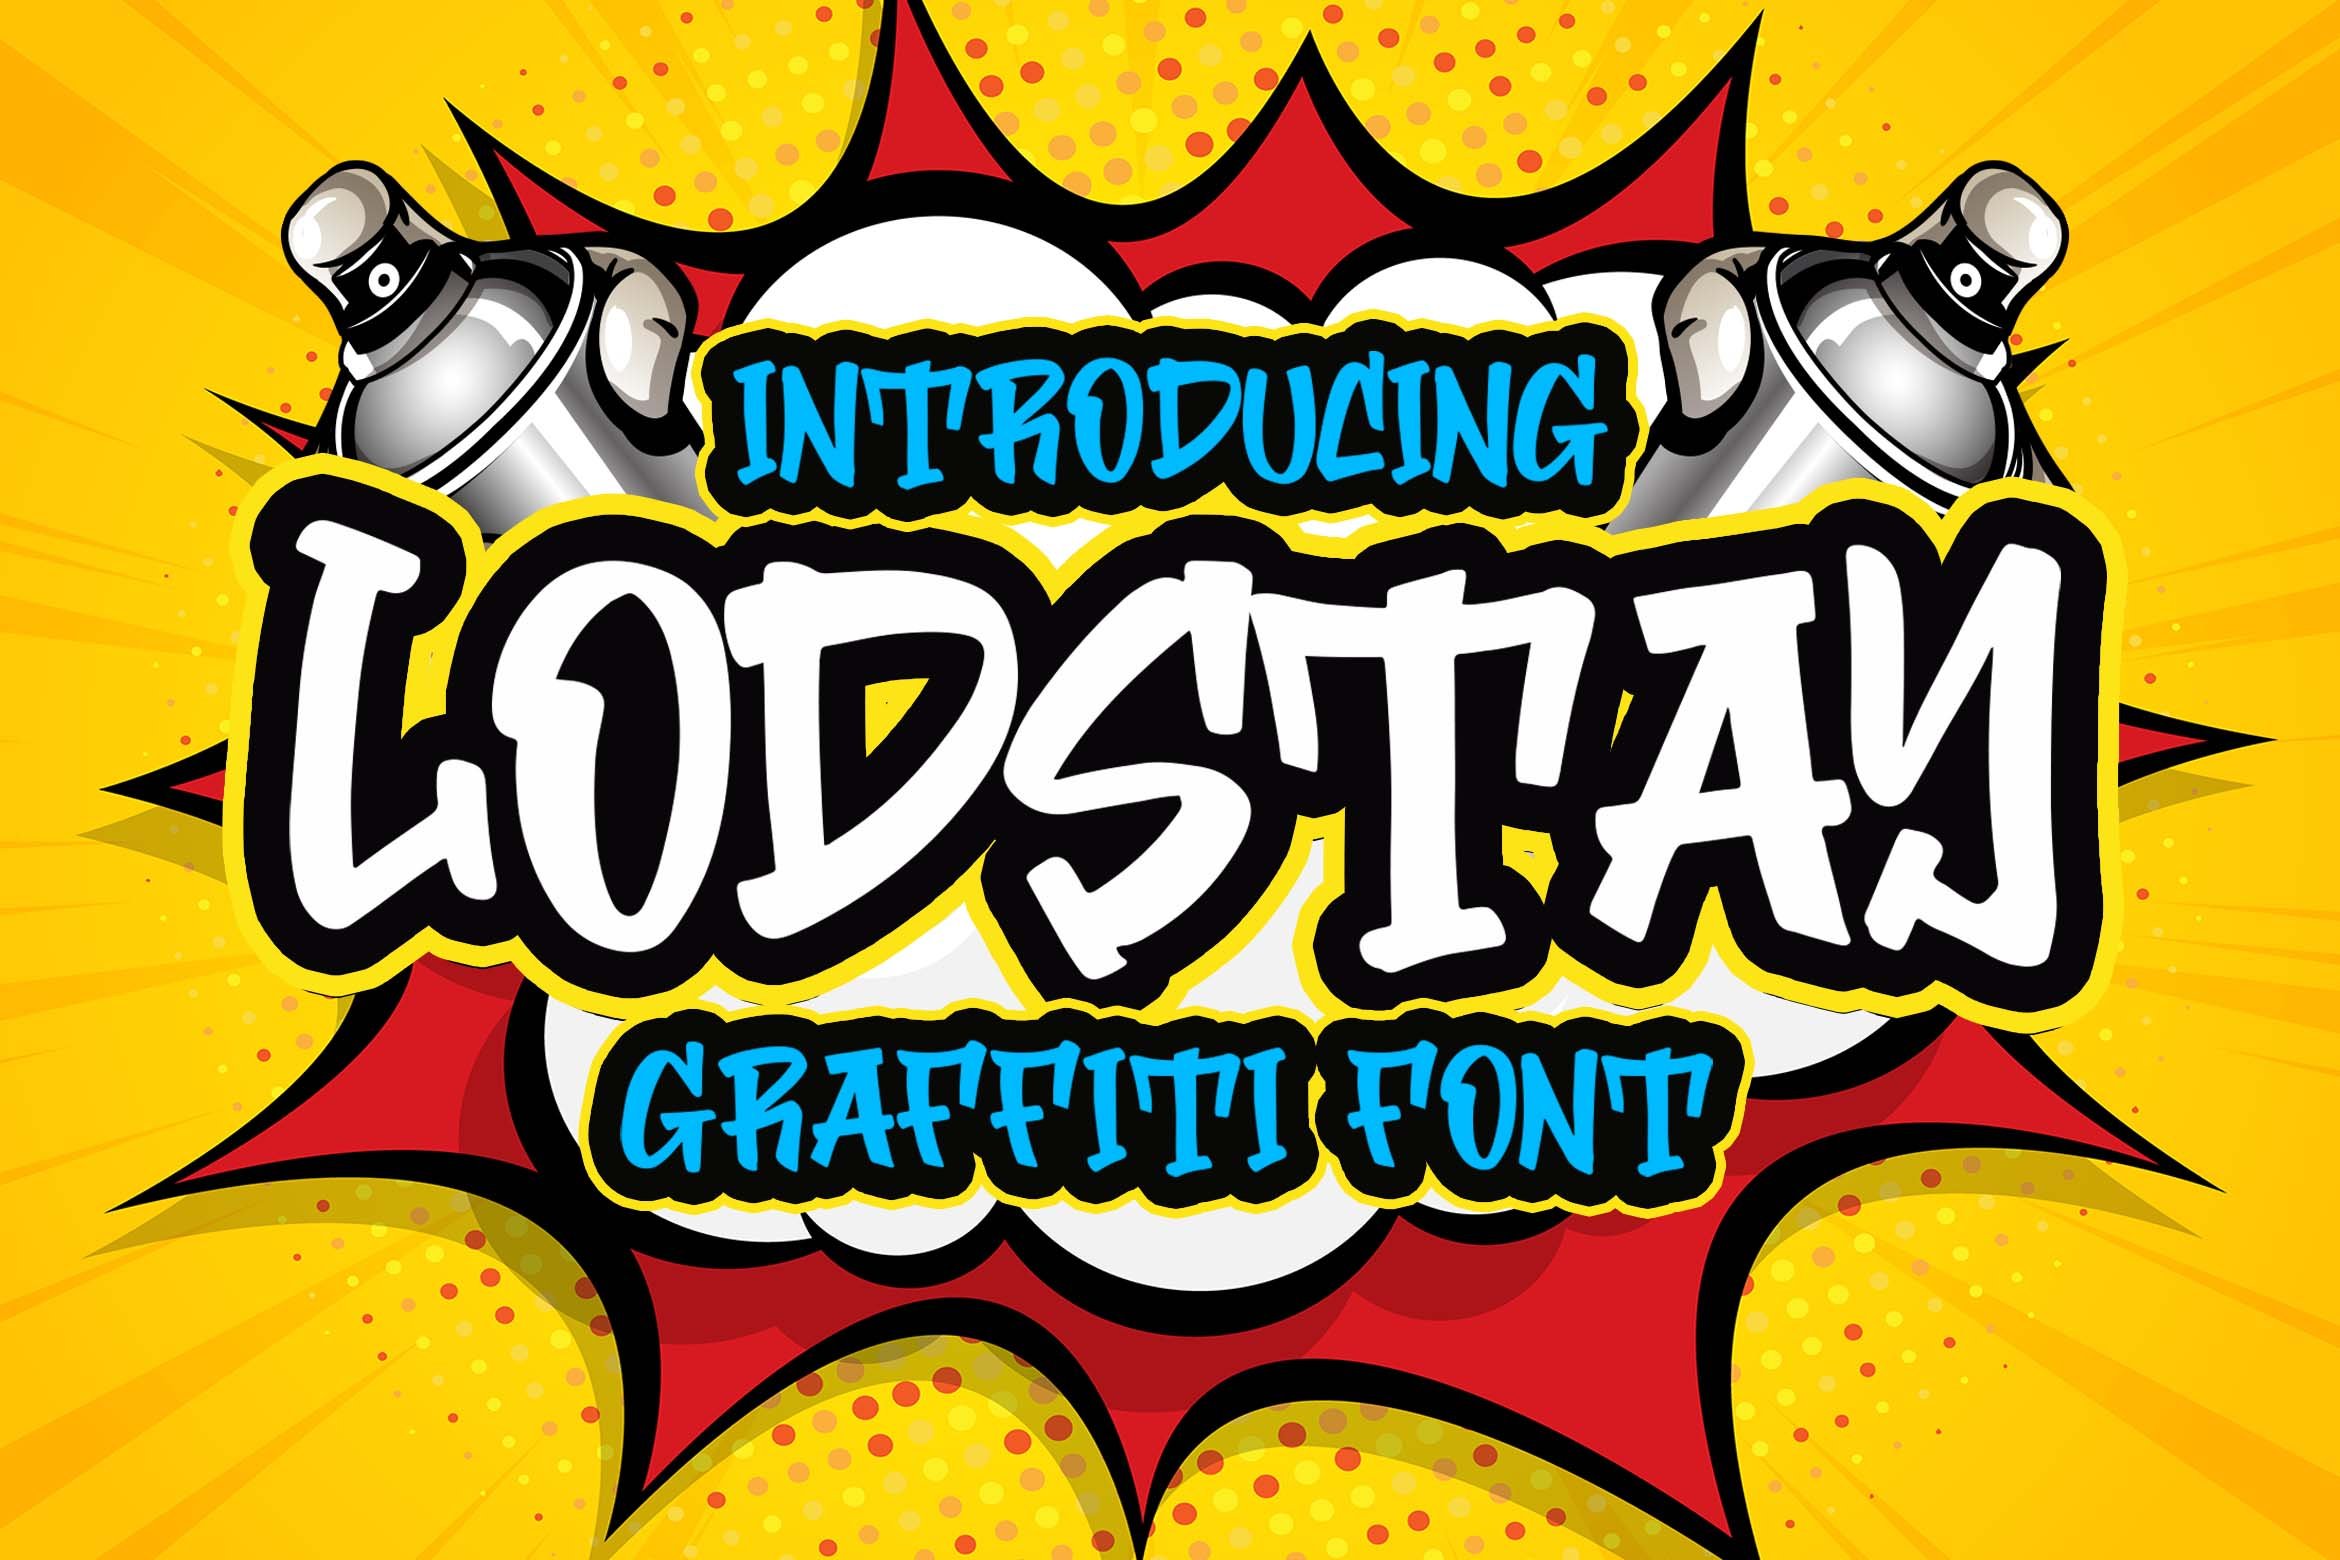 Lodstay - Graffity Font cover image.